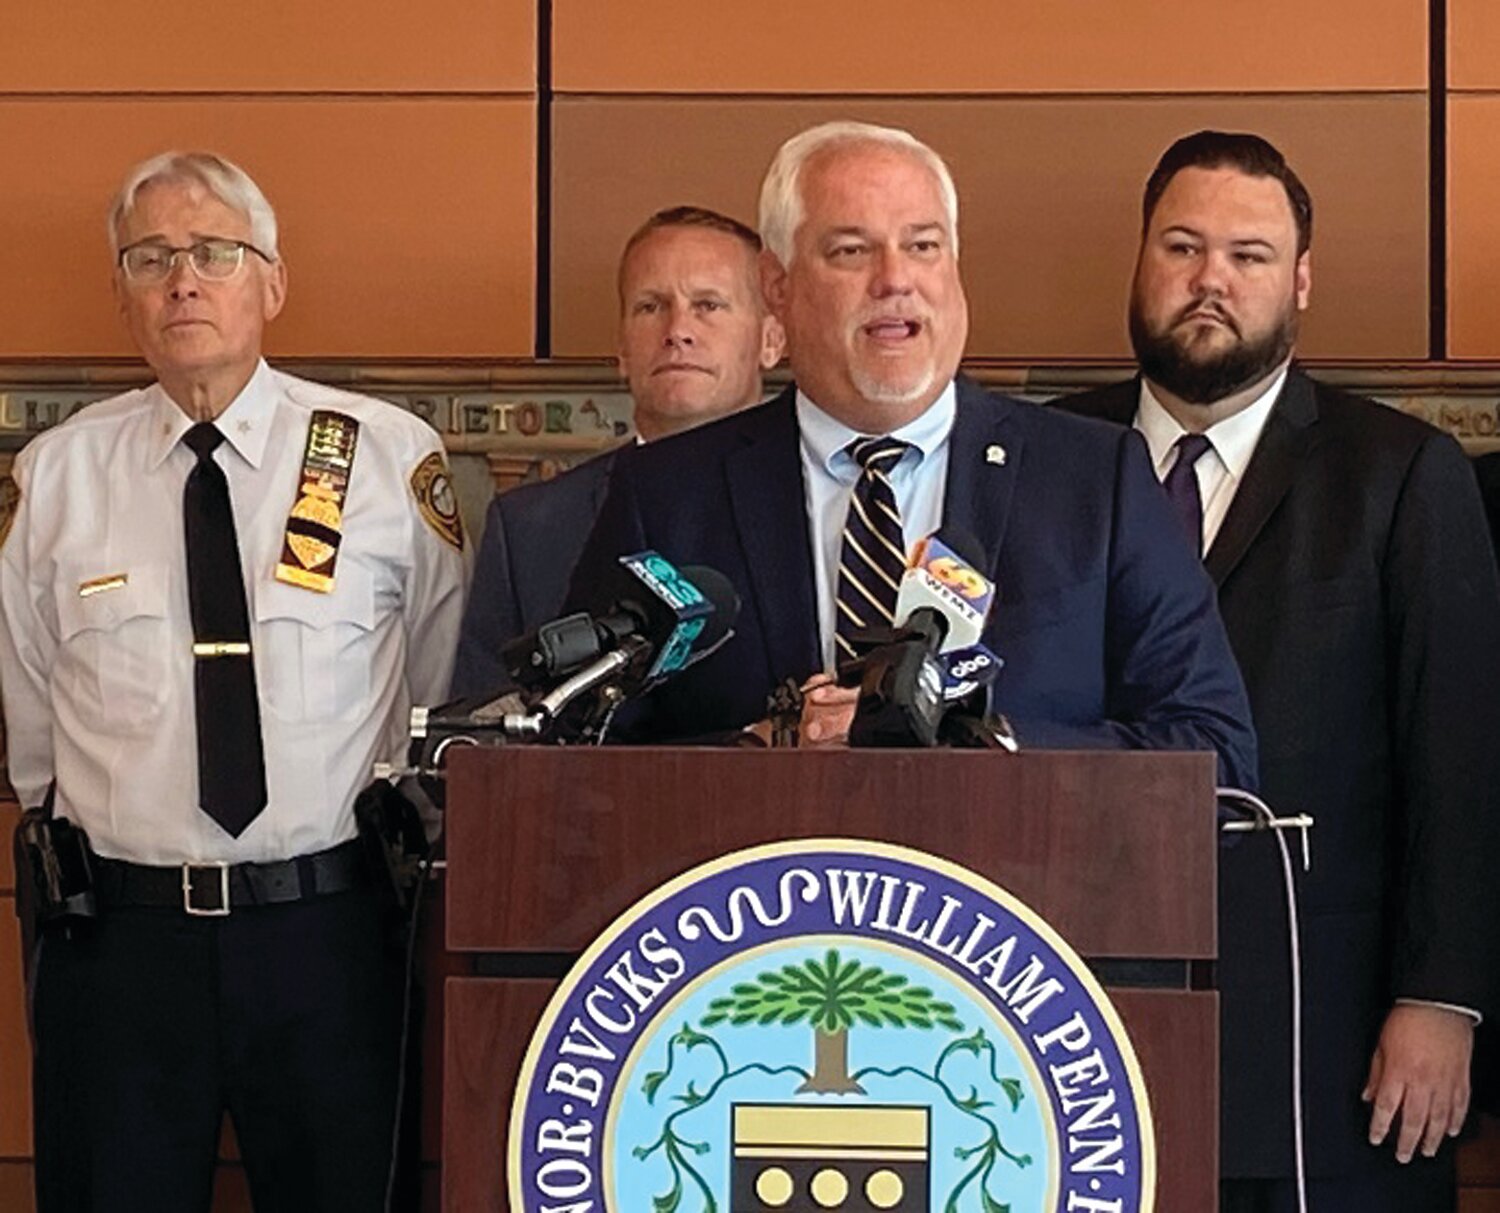 Bucks County District Attorney Matt Weintraub is surrounded by other law enforcement officials Tuesday during a press conference announcing the dismantling of a large scale catalytic converter theft ring.